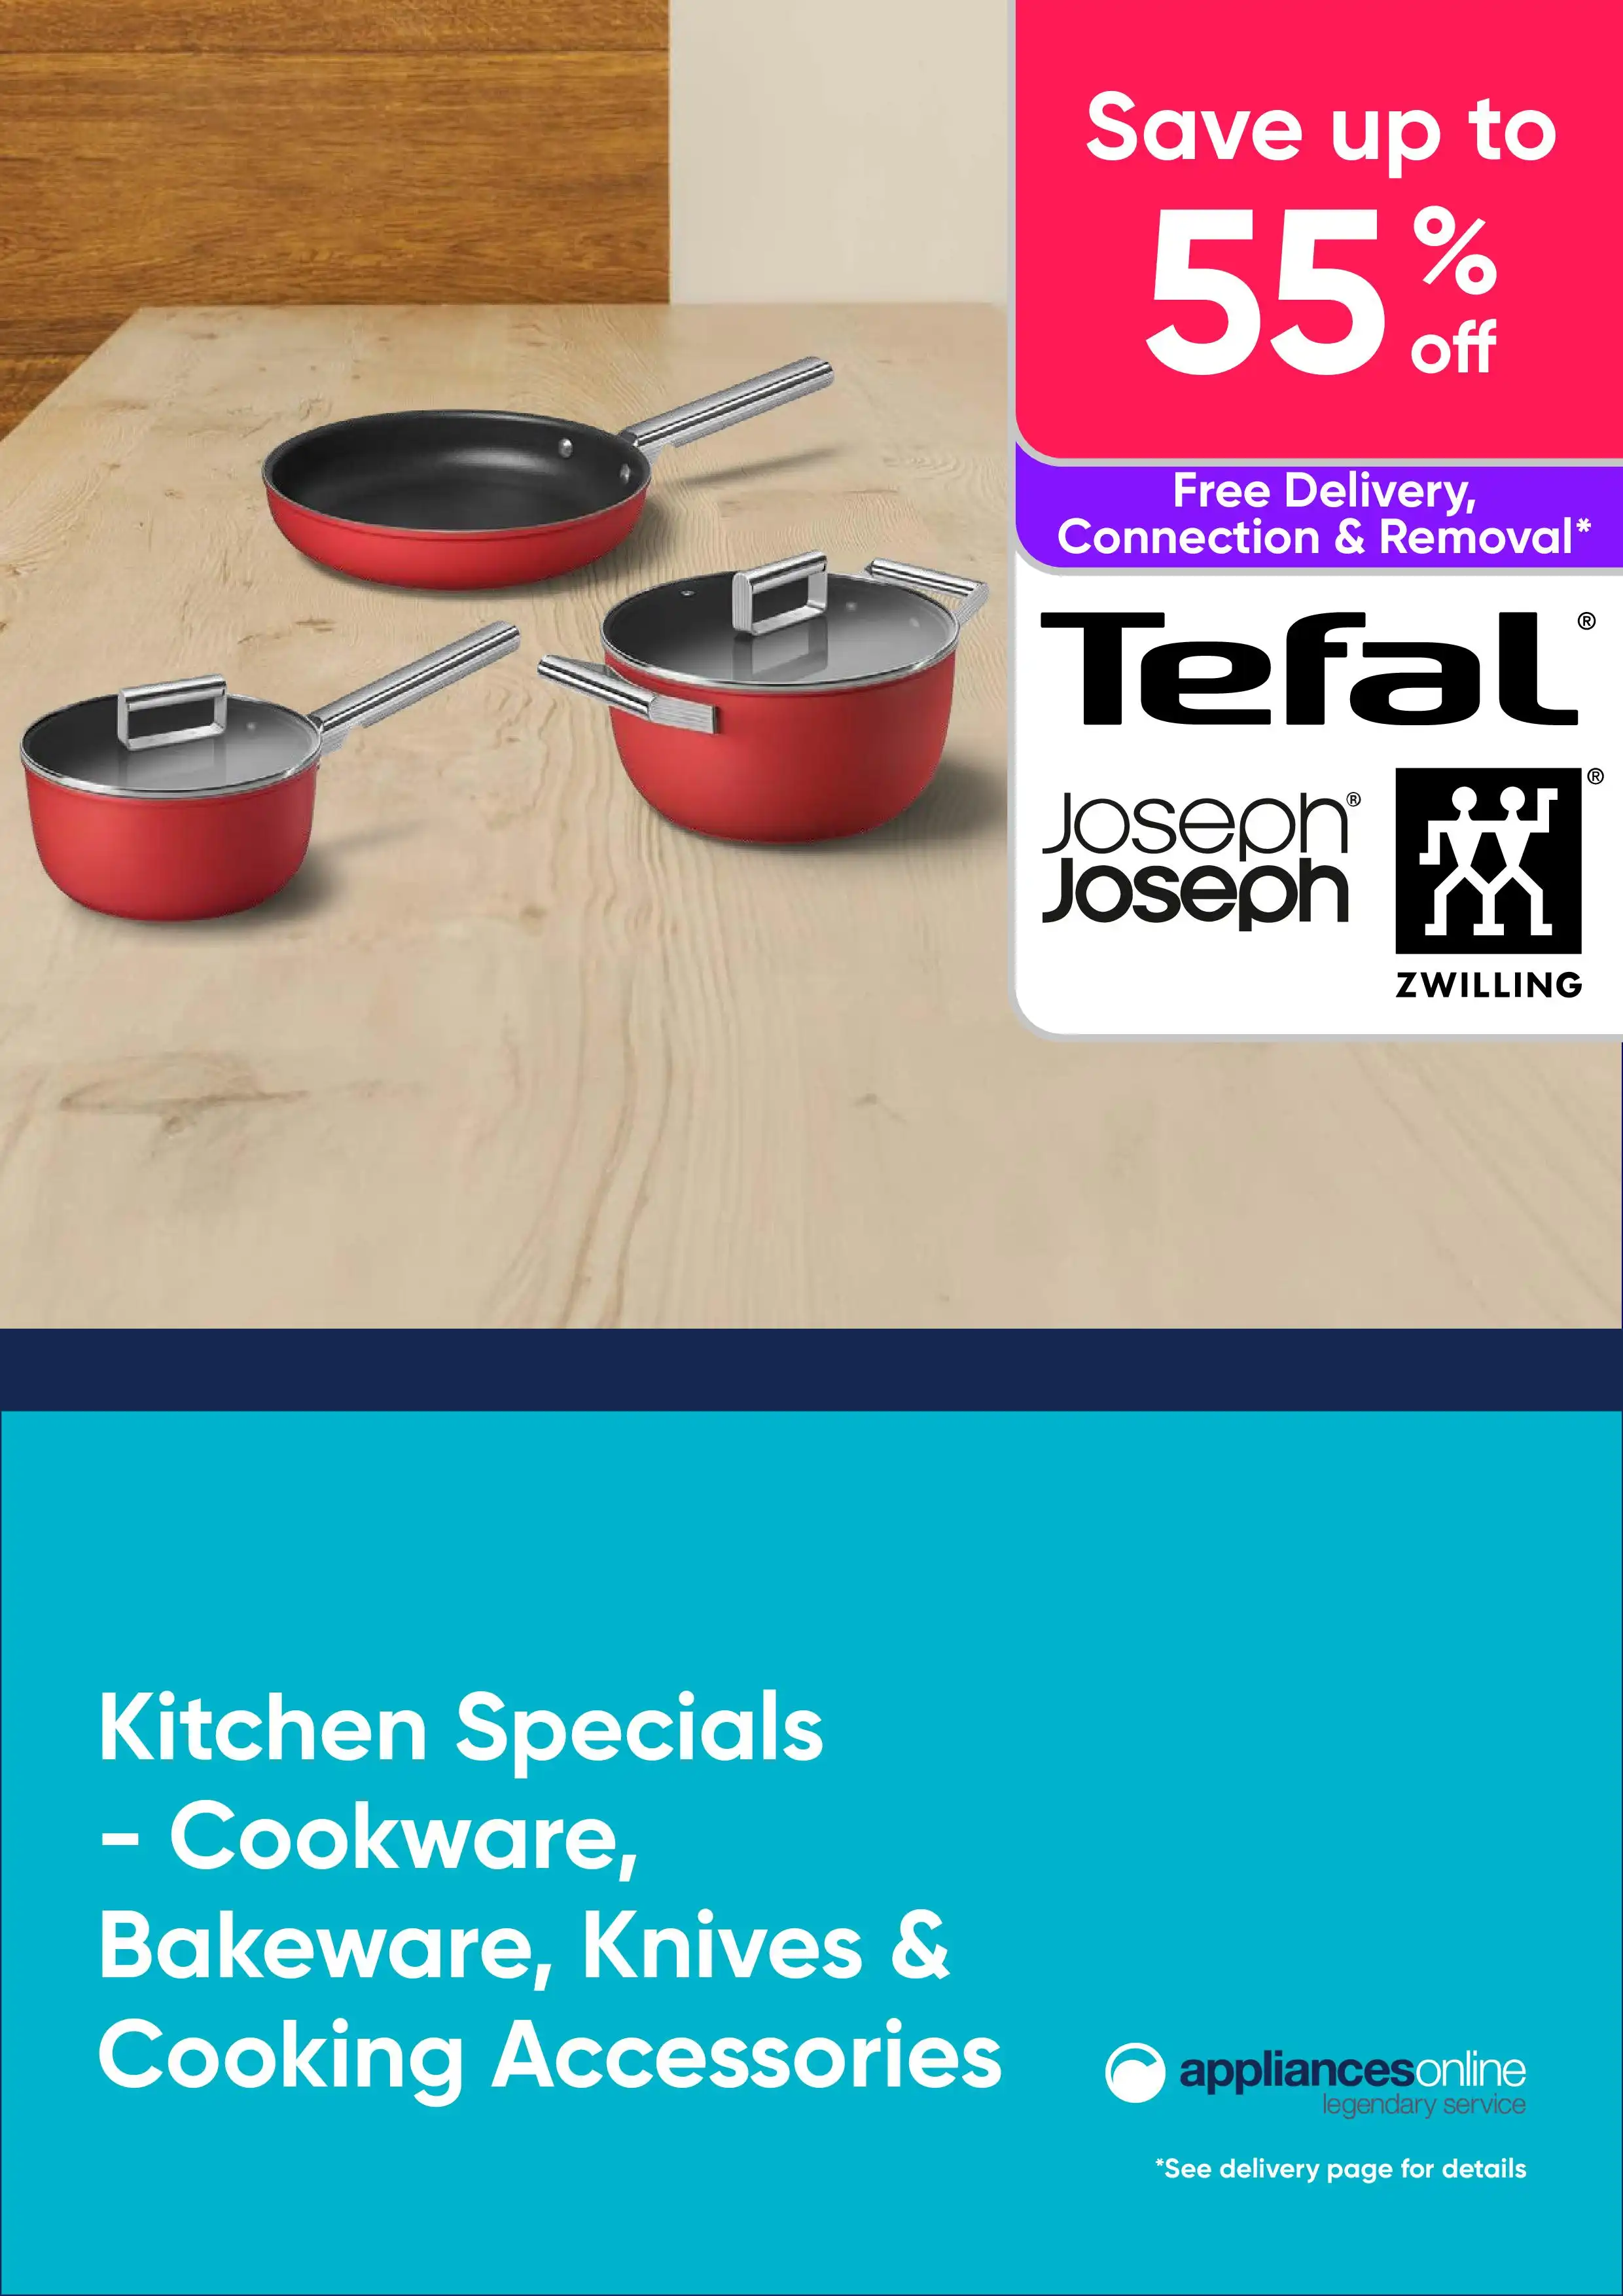 Appliances Online Kitchen Specials - Save Up to 55% RRP On Cookware, Bakeware & Cooking Accessories